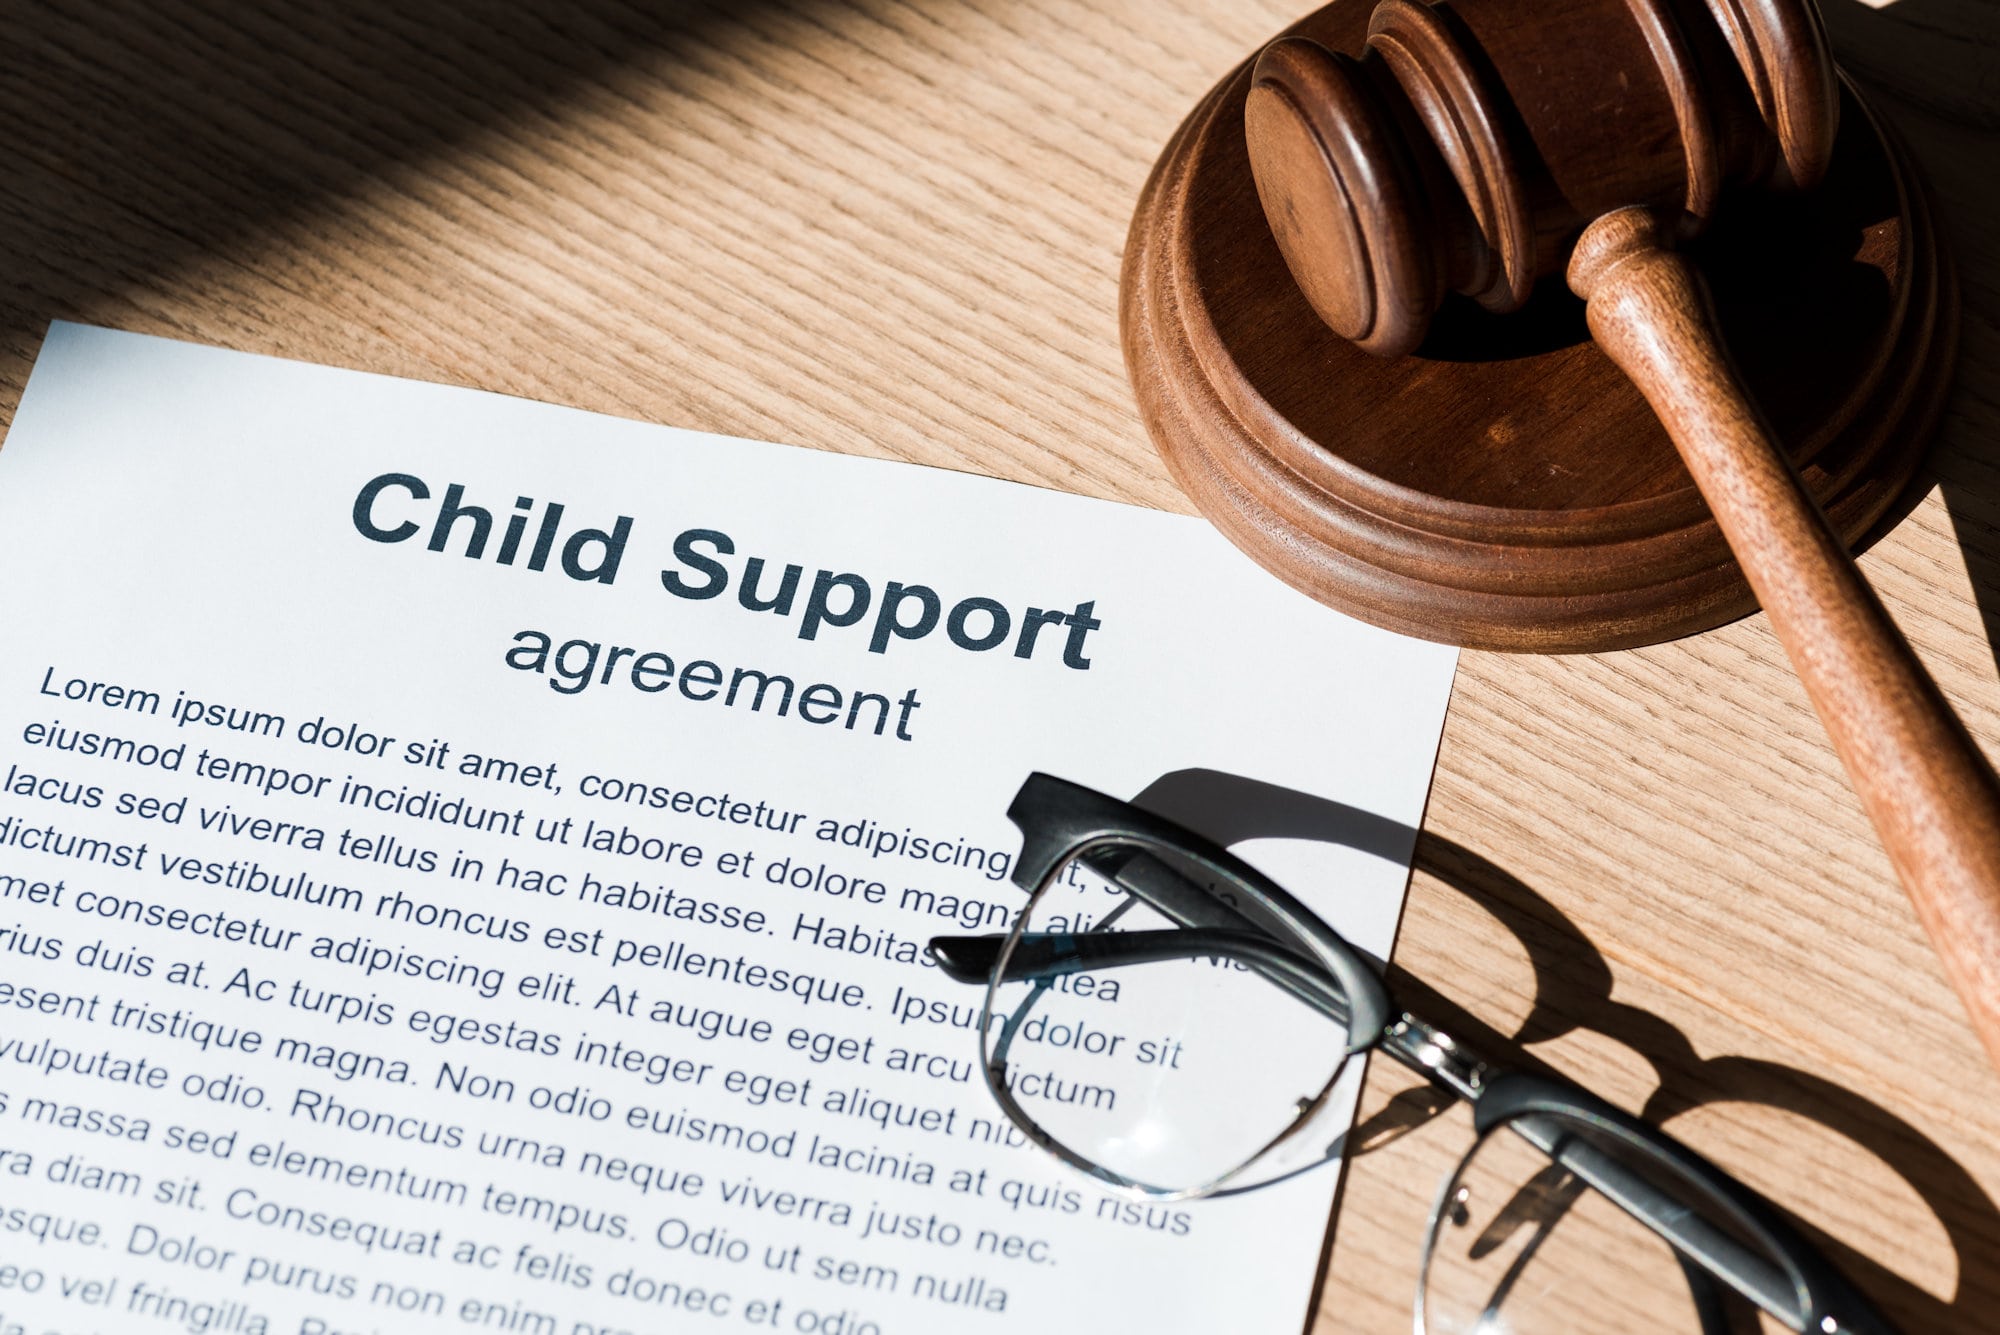 Legal document of child support agreement, with glasses, and a gavel and hammer